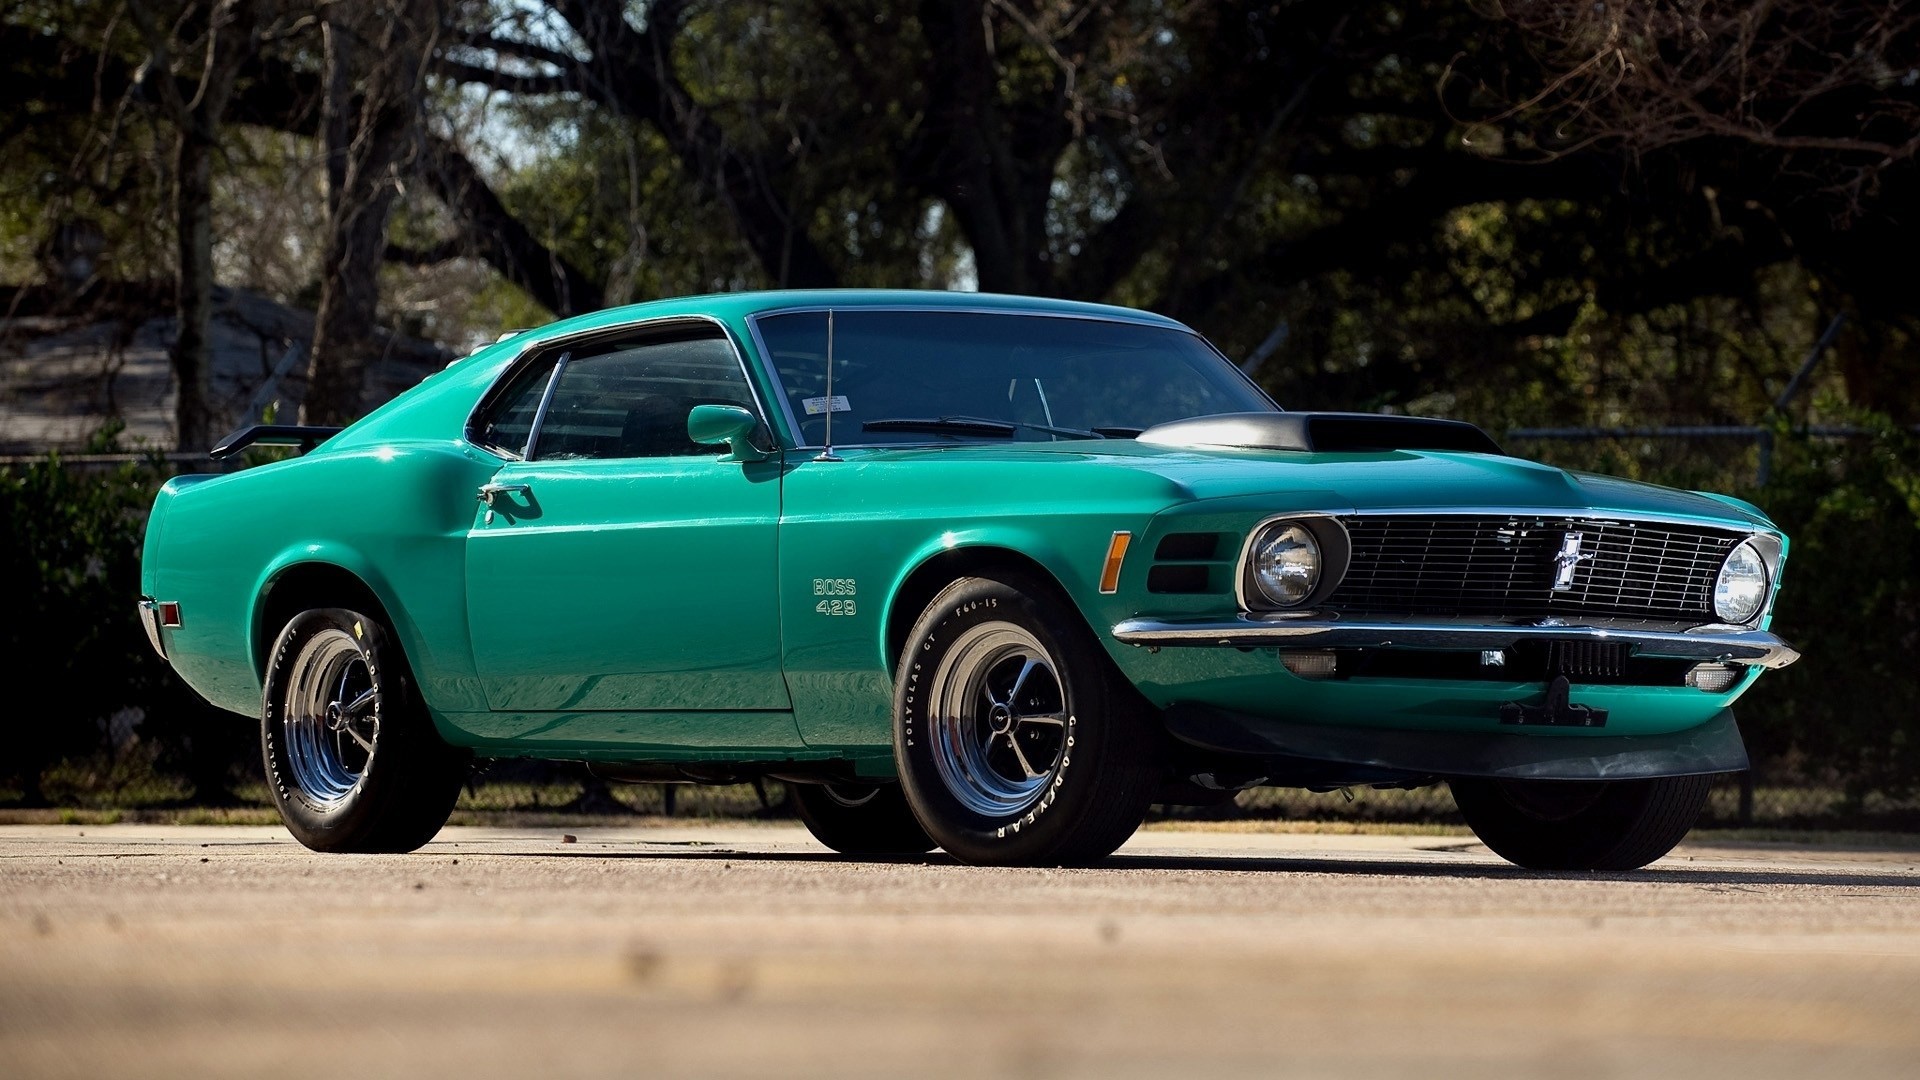 1920x1080  free desktop backgrounds for ford mustang boss 429